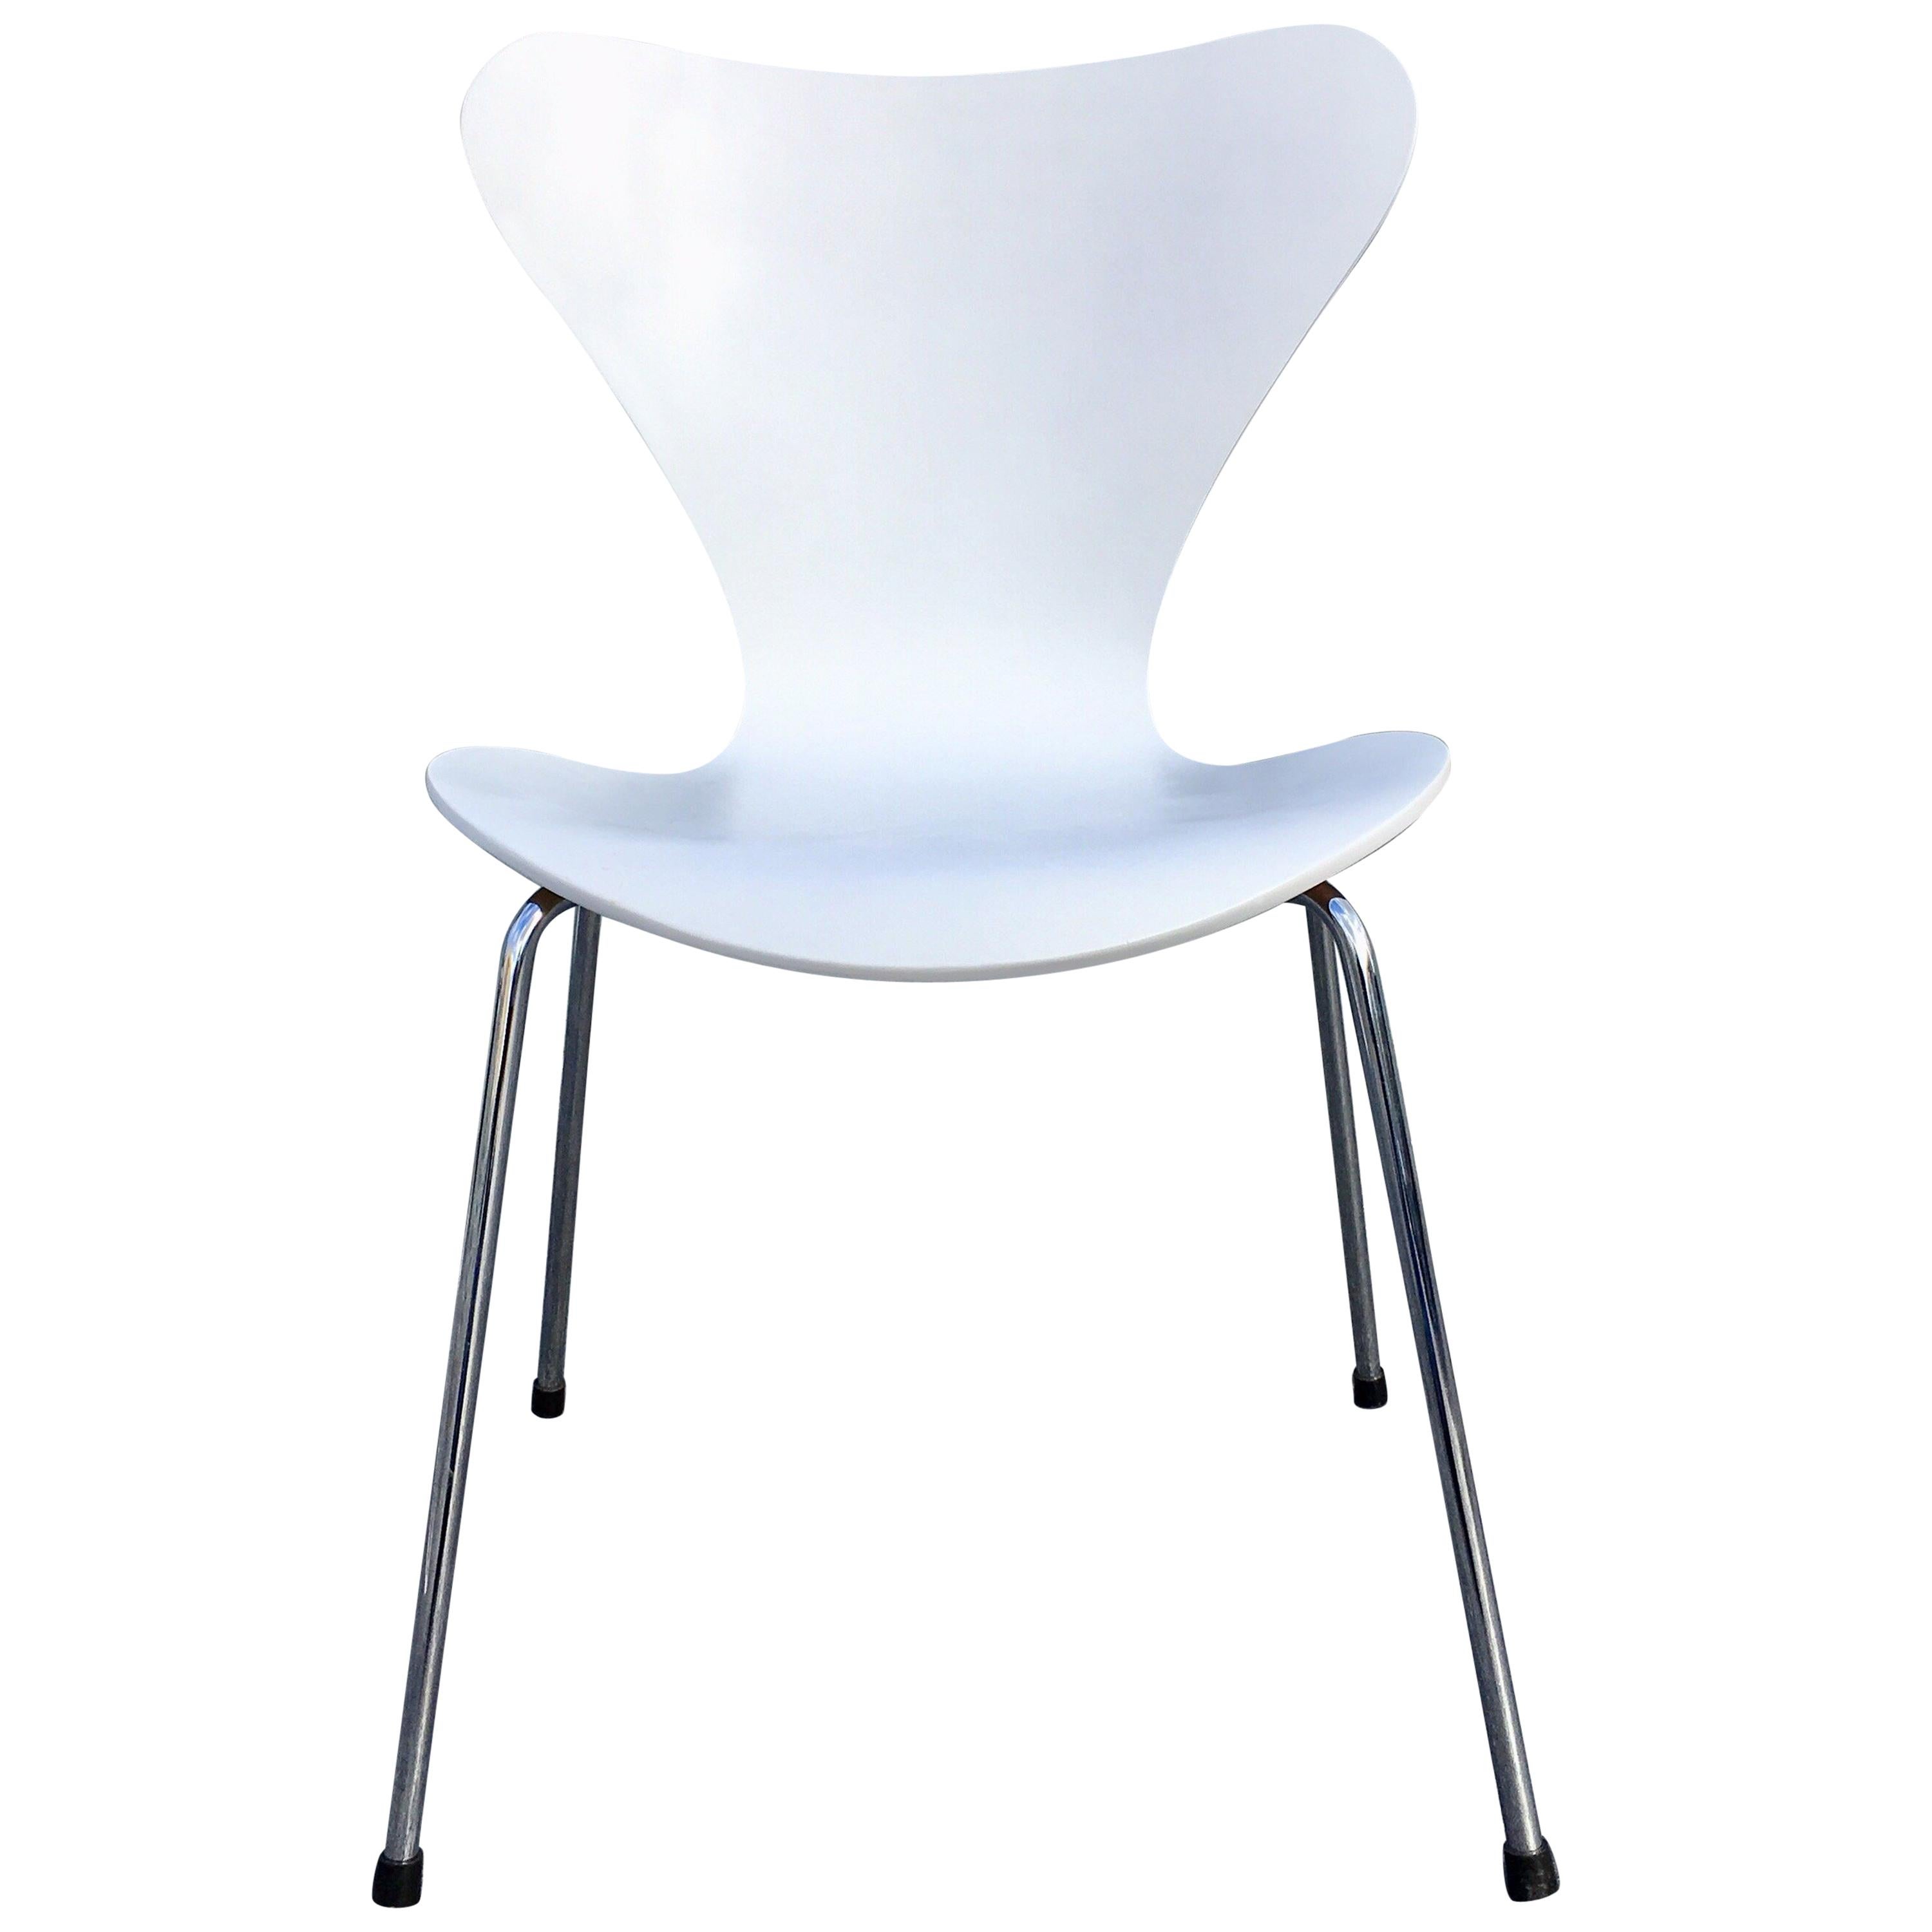 Six original Arne Jacobsen chairs in white, more available.